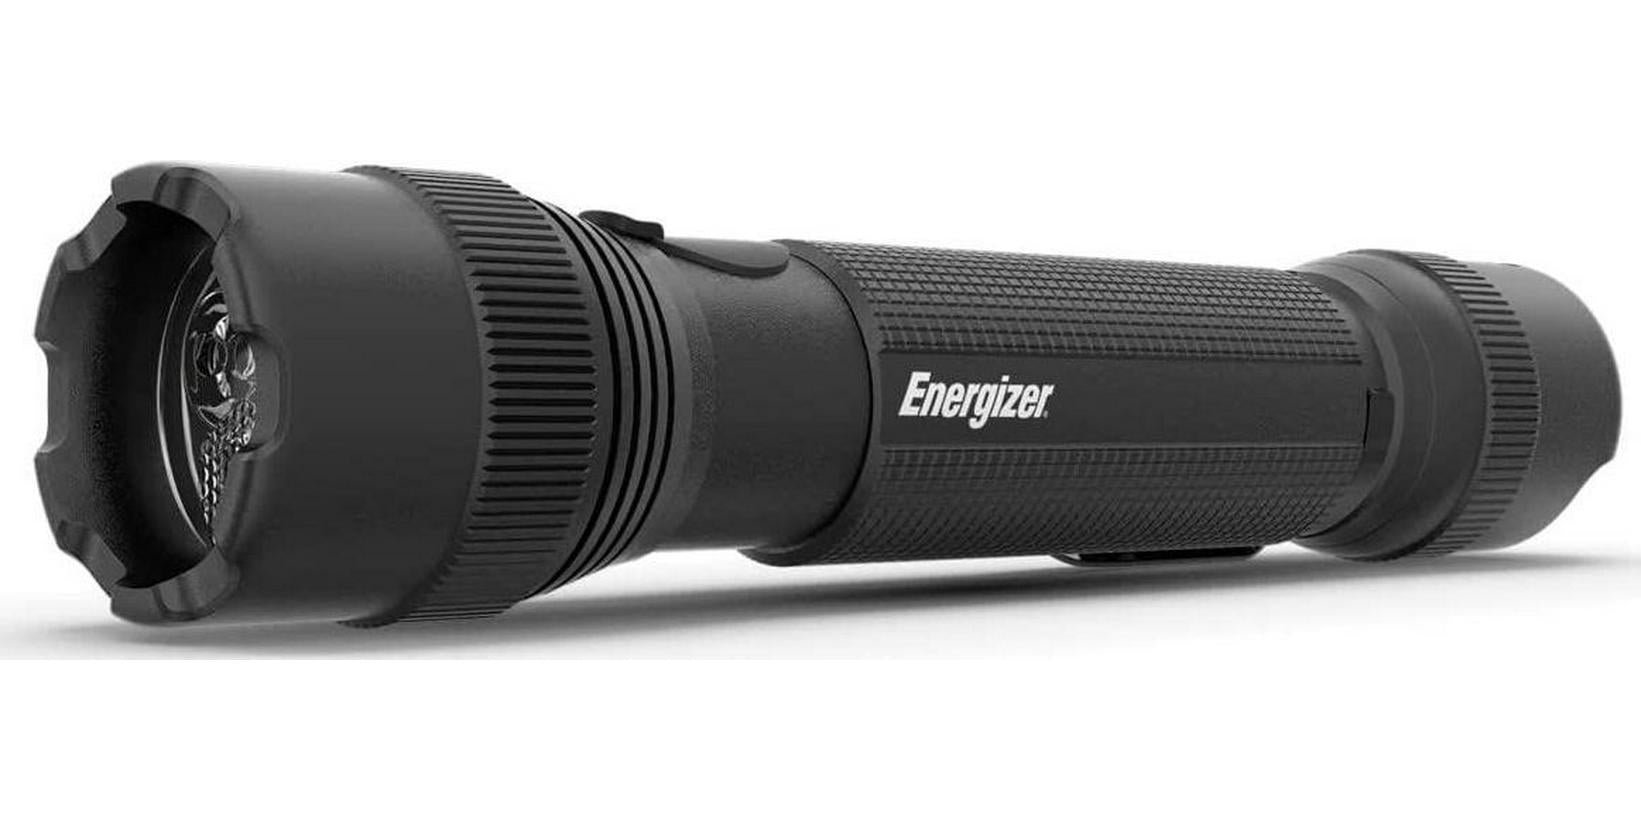 Energizer, Energizer LED Tactical Metal Flashlight, Ultra Bright 700 High Lumens, Durable Aircraft-Grade Metal Body, IPX4 Water-Resistant, 4 Modes, Rechargeable Flashlight Option